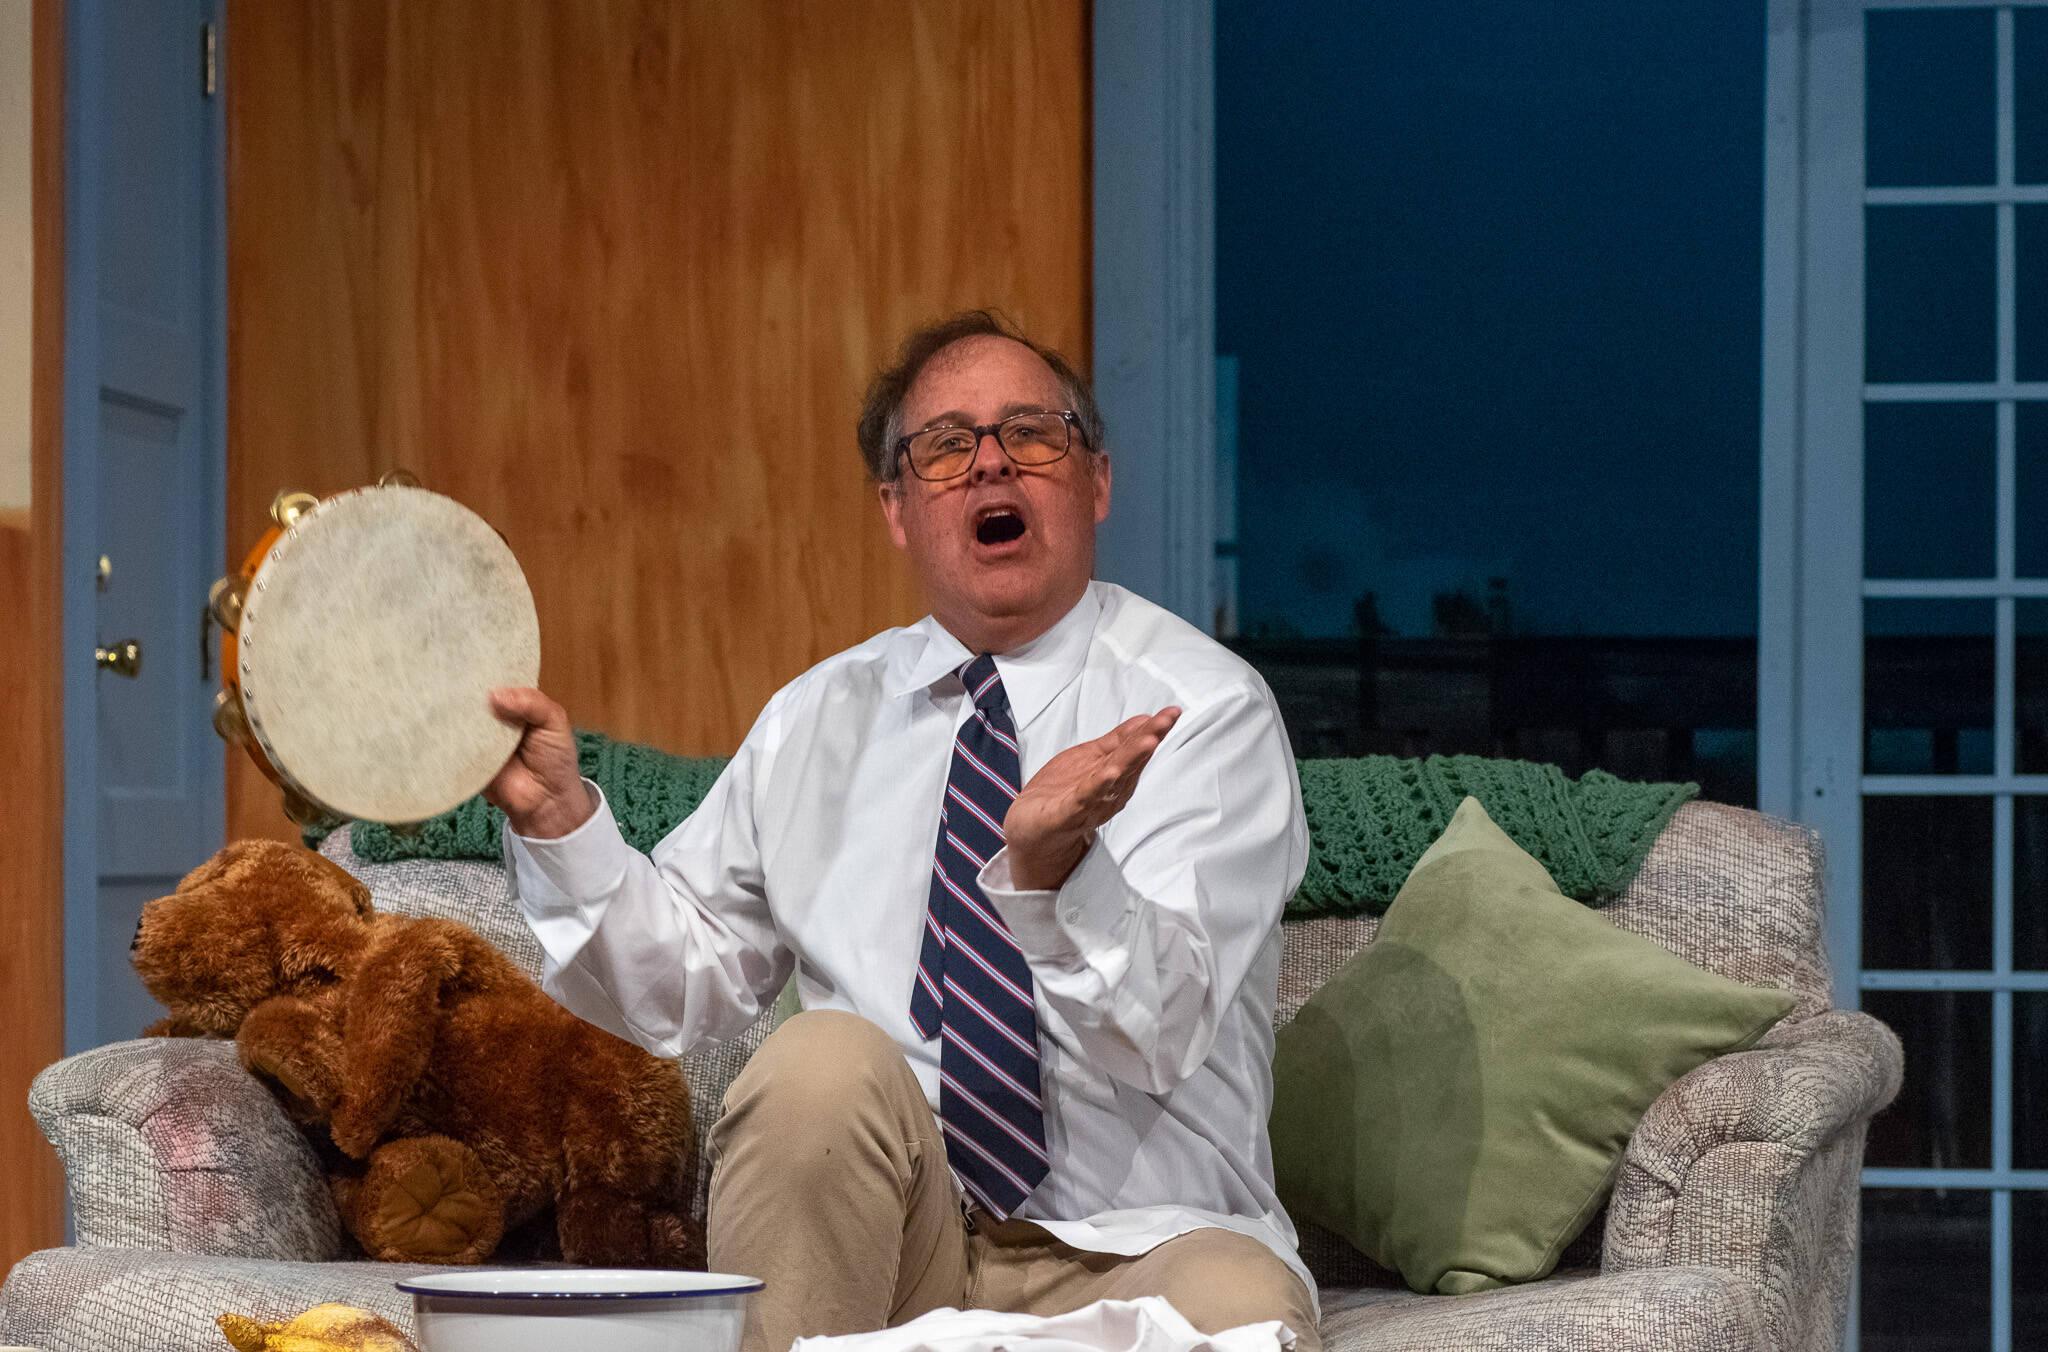 David Herbelin, cast as “The Nerd” in the upcoming Olympic Theatre Arts production, doesn’t hold back with the physical comedy in a play that has kept the cast and crew laughing through eight weeks of rehearsals. (Emily Matthiessen/Olympic Peninsula News Group)